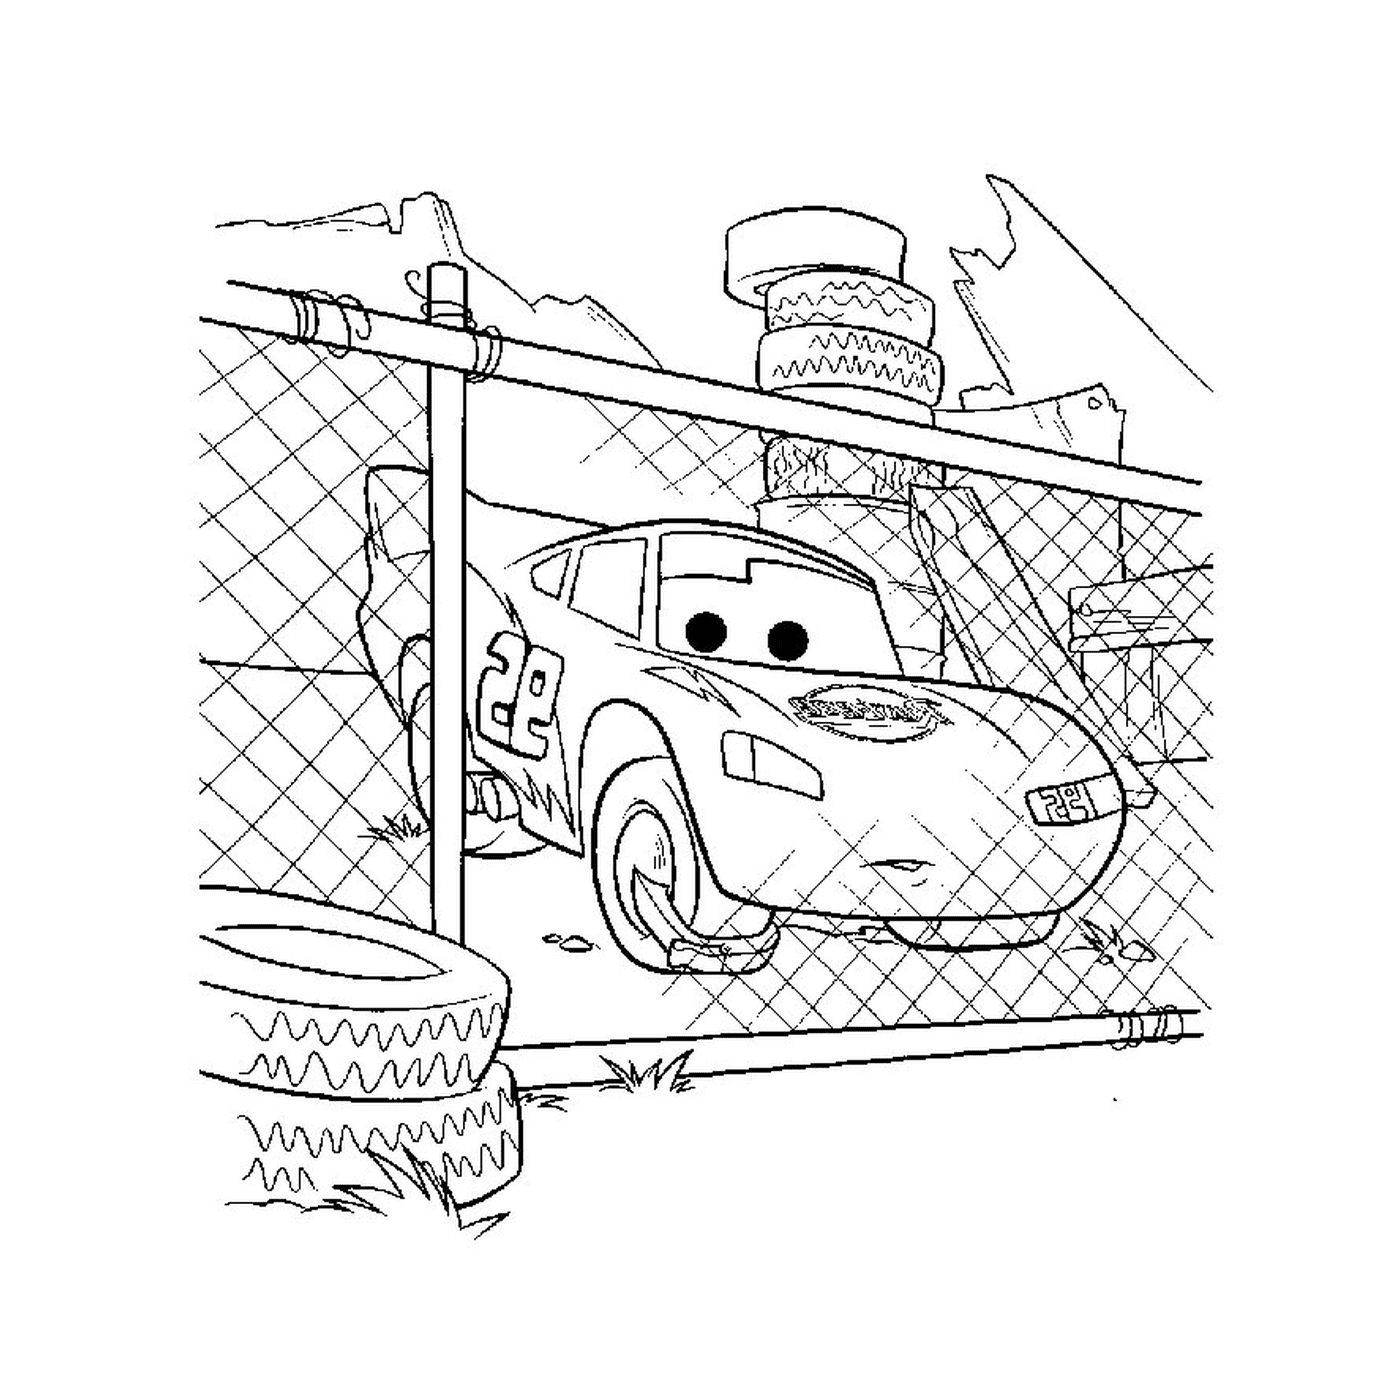  A car in a fenced area 